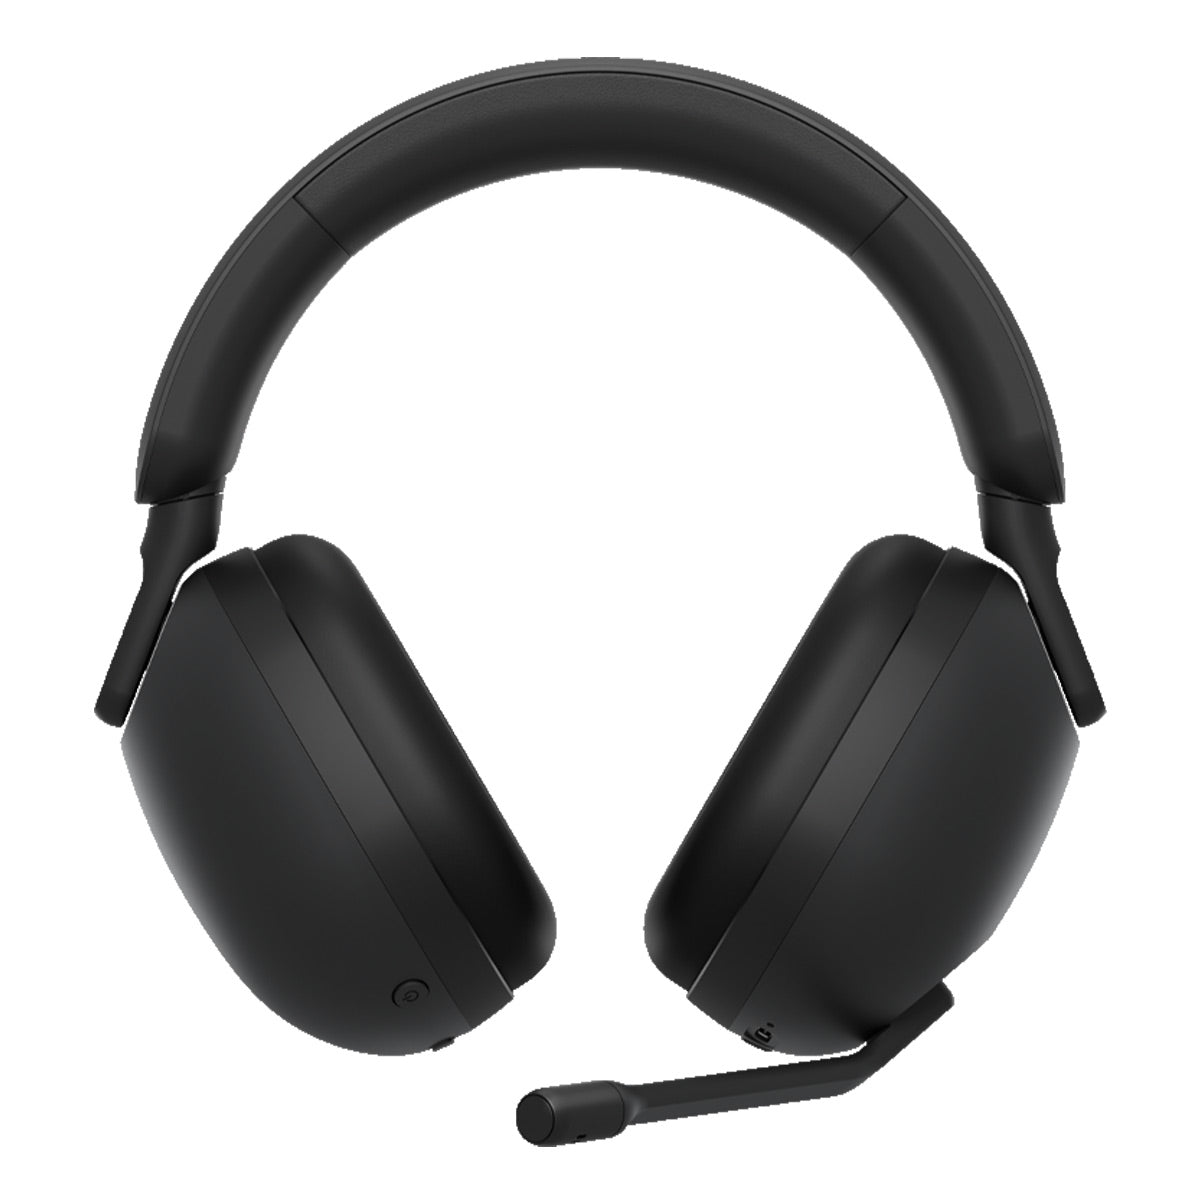 Sony INZONE H9 Wireless Noise Cancelling Gaming Headset (Black)